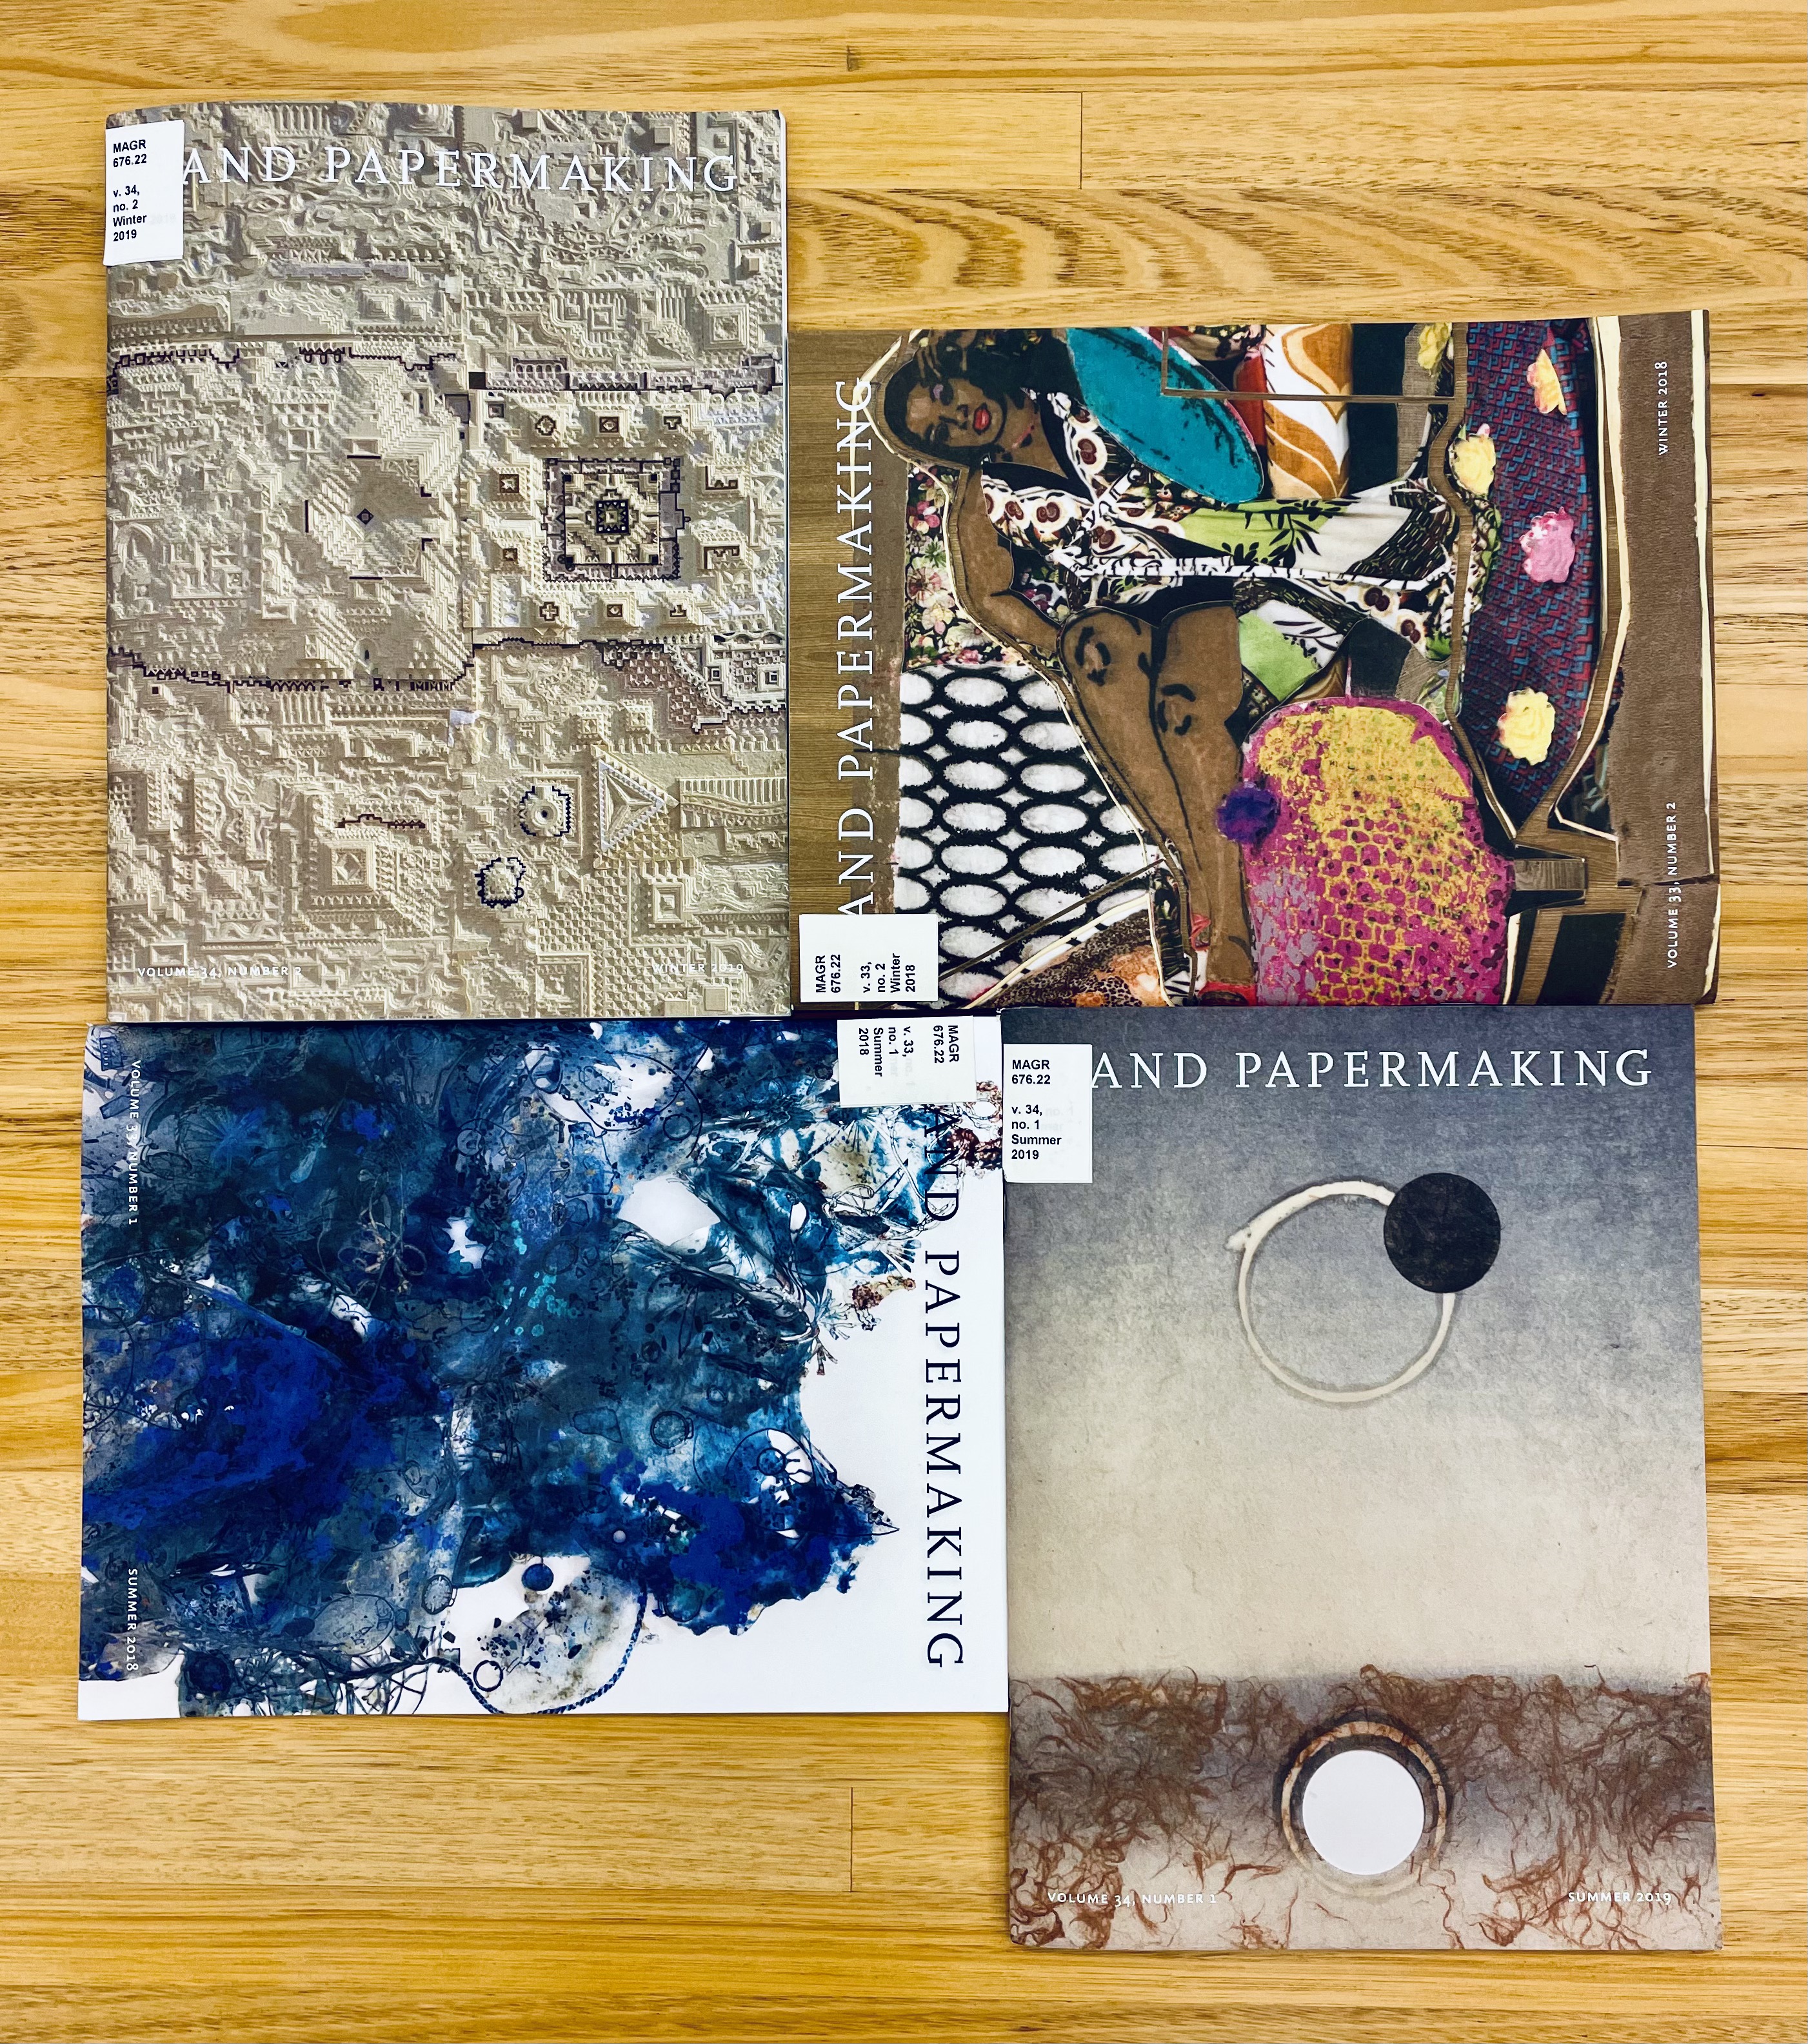 Image of four front covers for the magazine "Hand Papermaking" displaying different types of paper